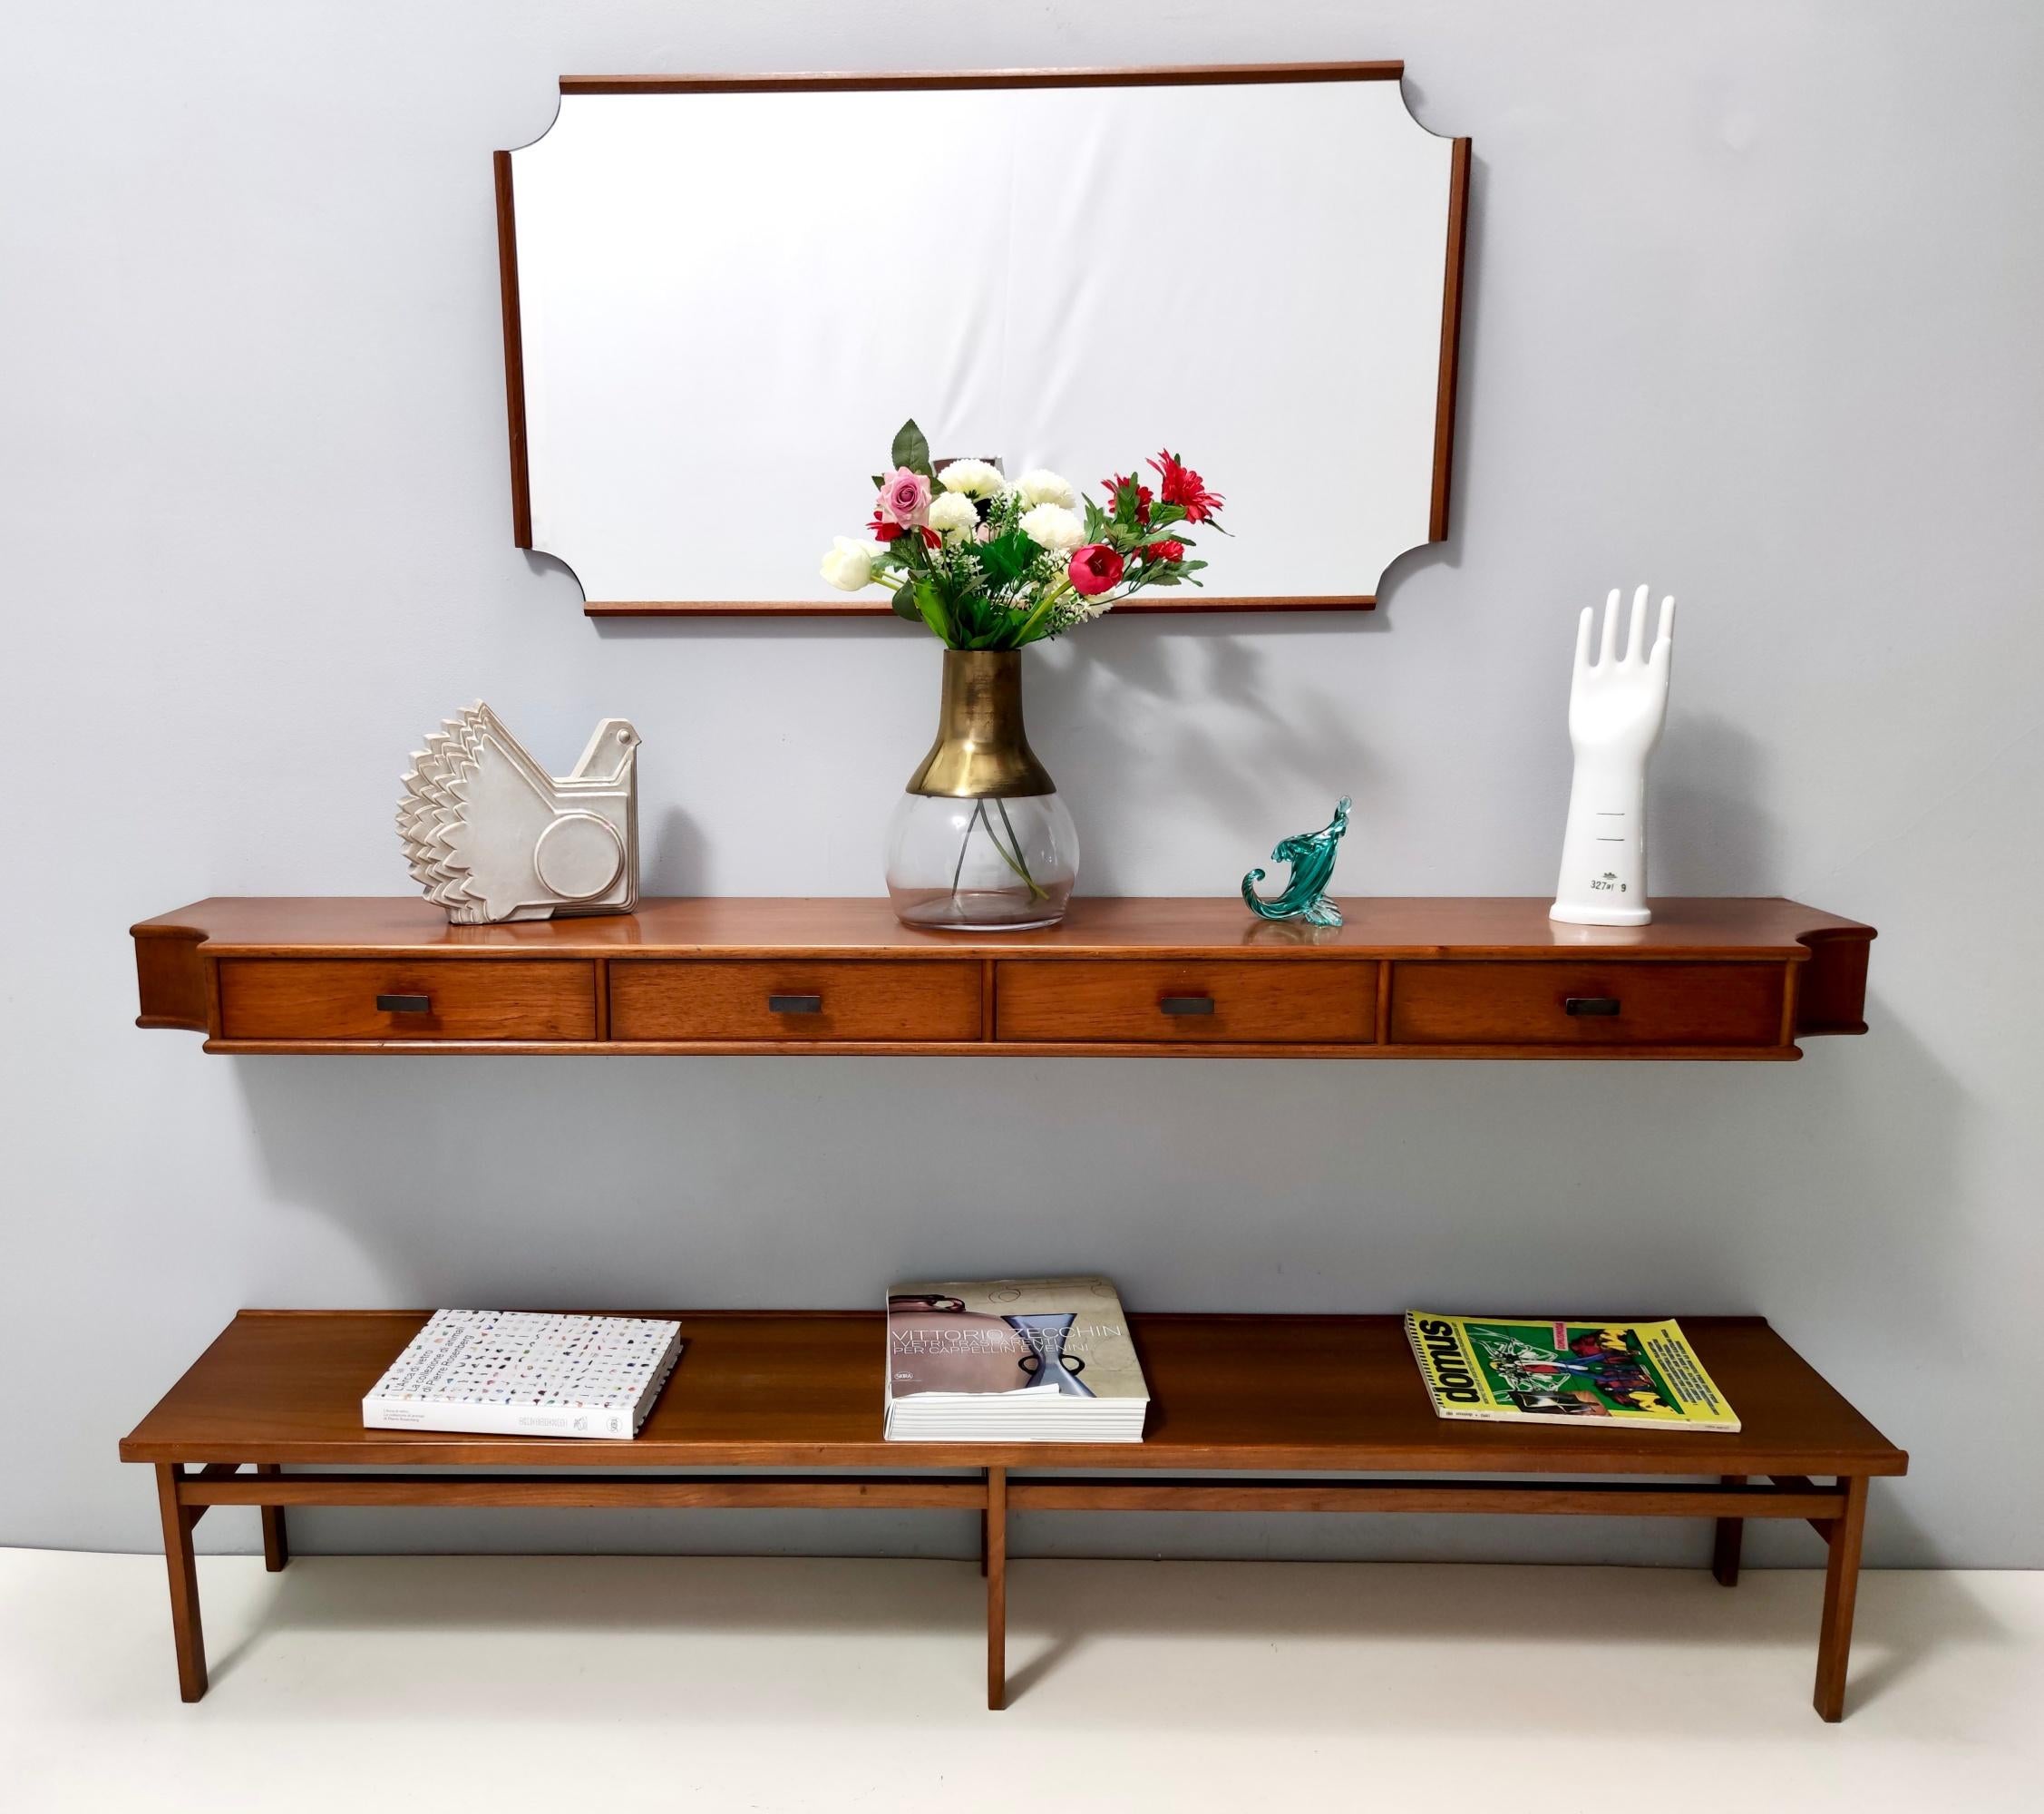 Made in Italy, 1959.
The console table are made in walnut. 
The design of the corners of the mirror recalls that of the corners of the console, to give a pleasing and coherent look to the whole set. 
This set is in the style of Ico Parisi.
Cushions